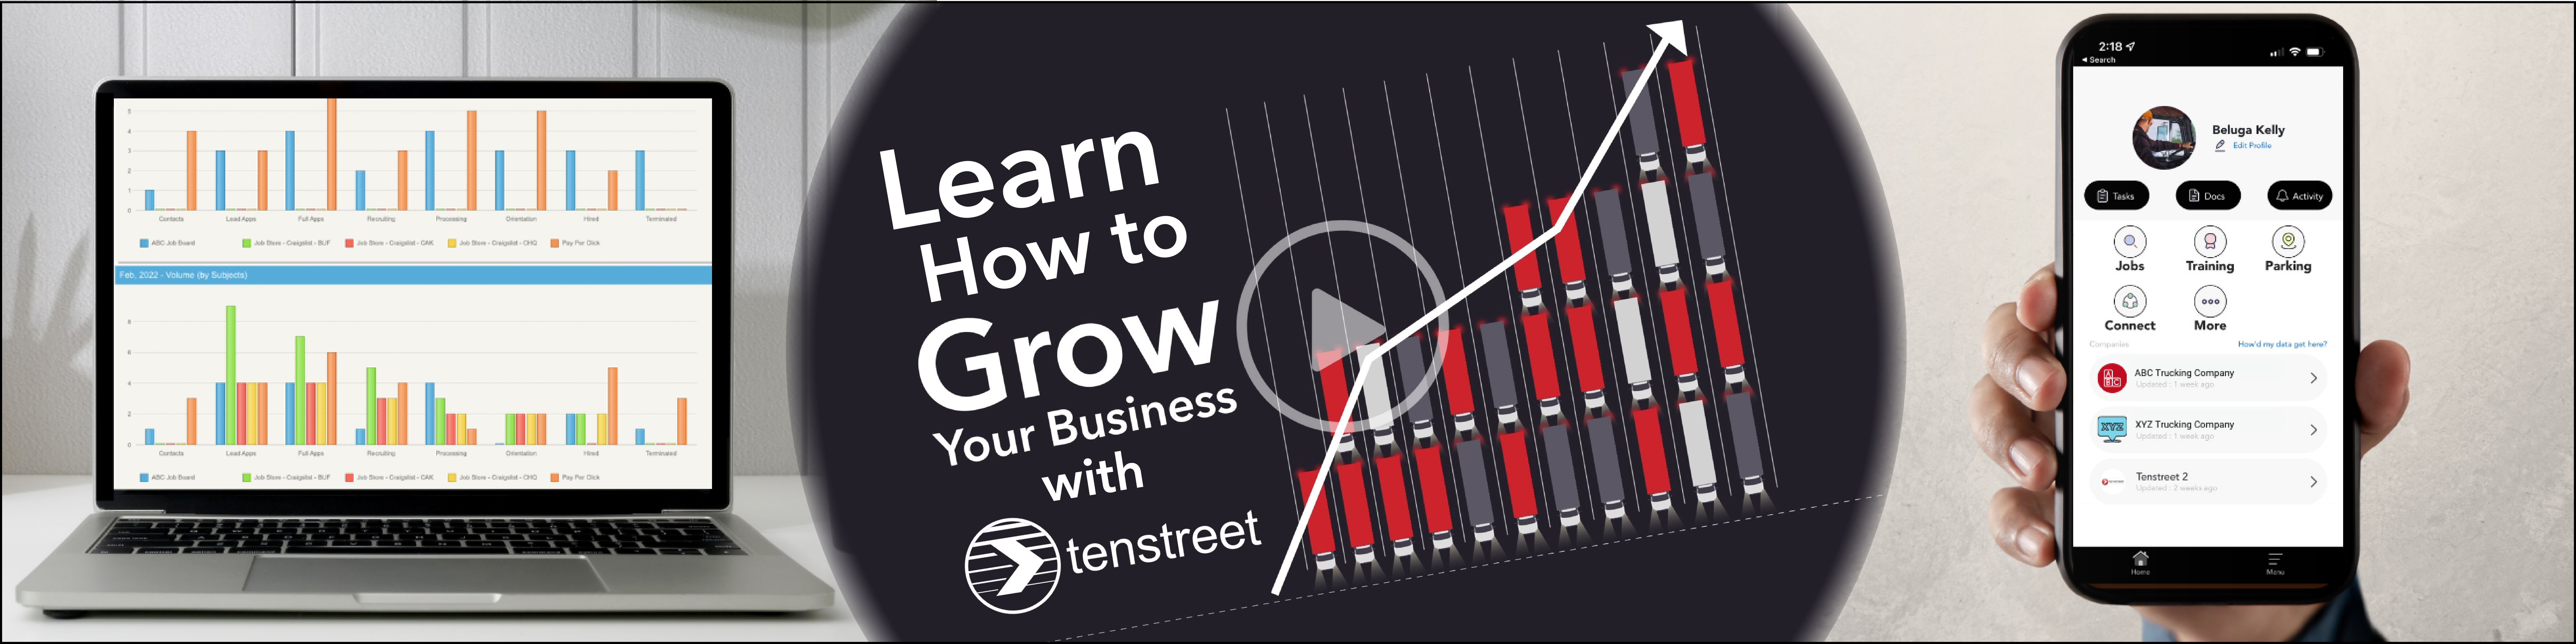 Learn how to grow your business with Tenstreet video